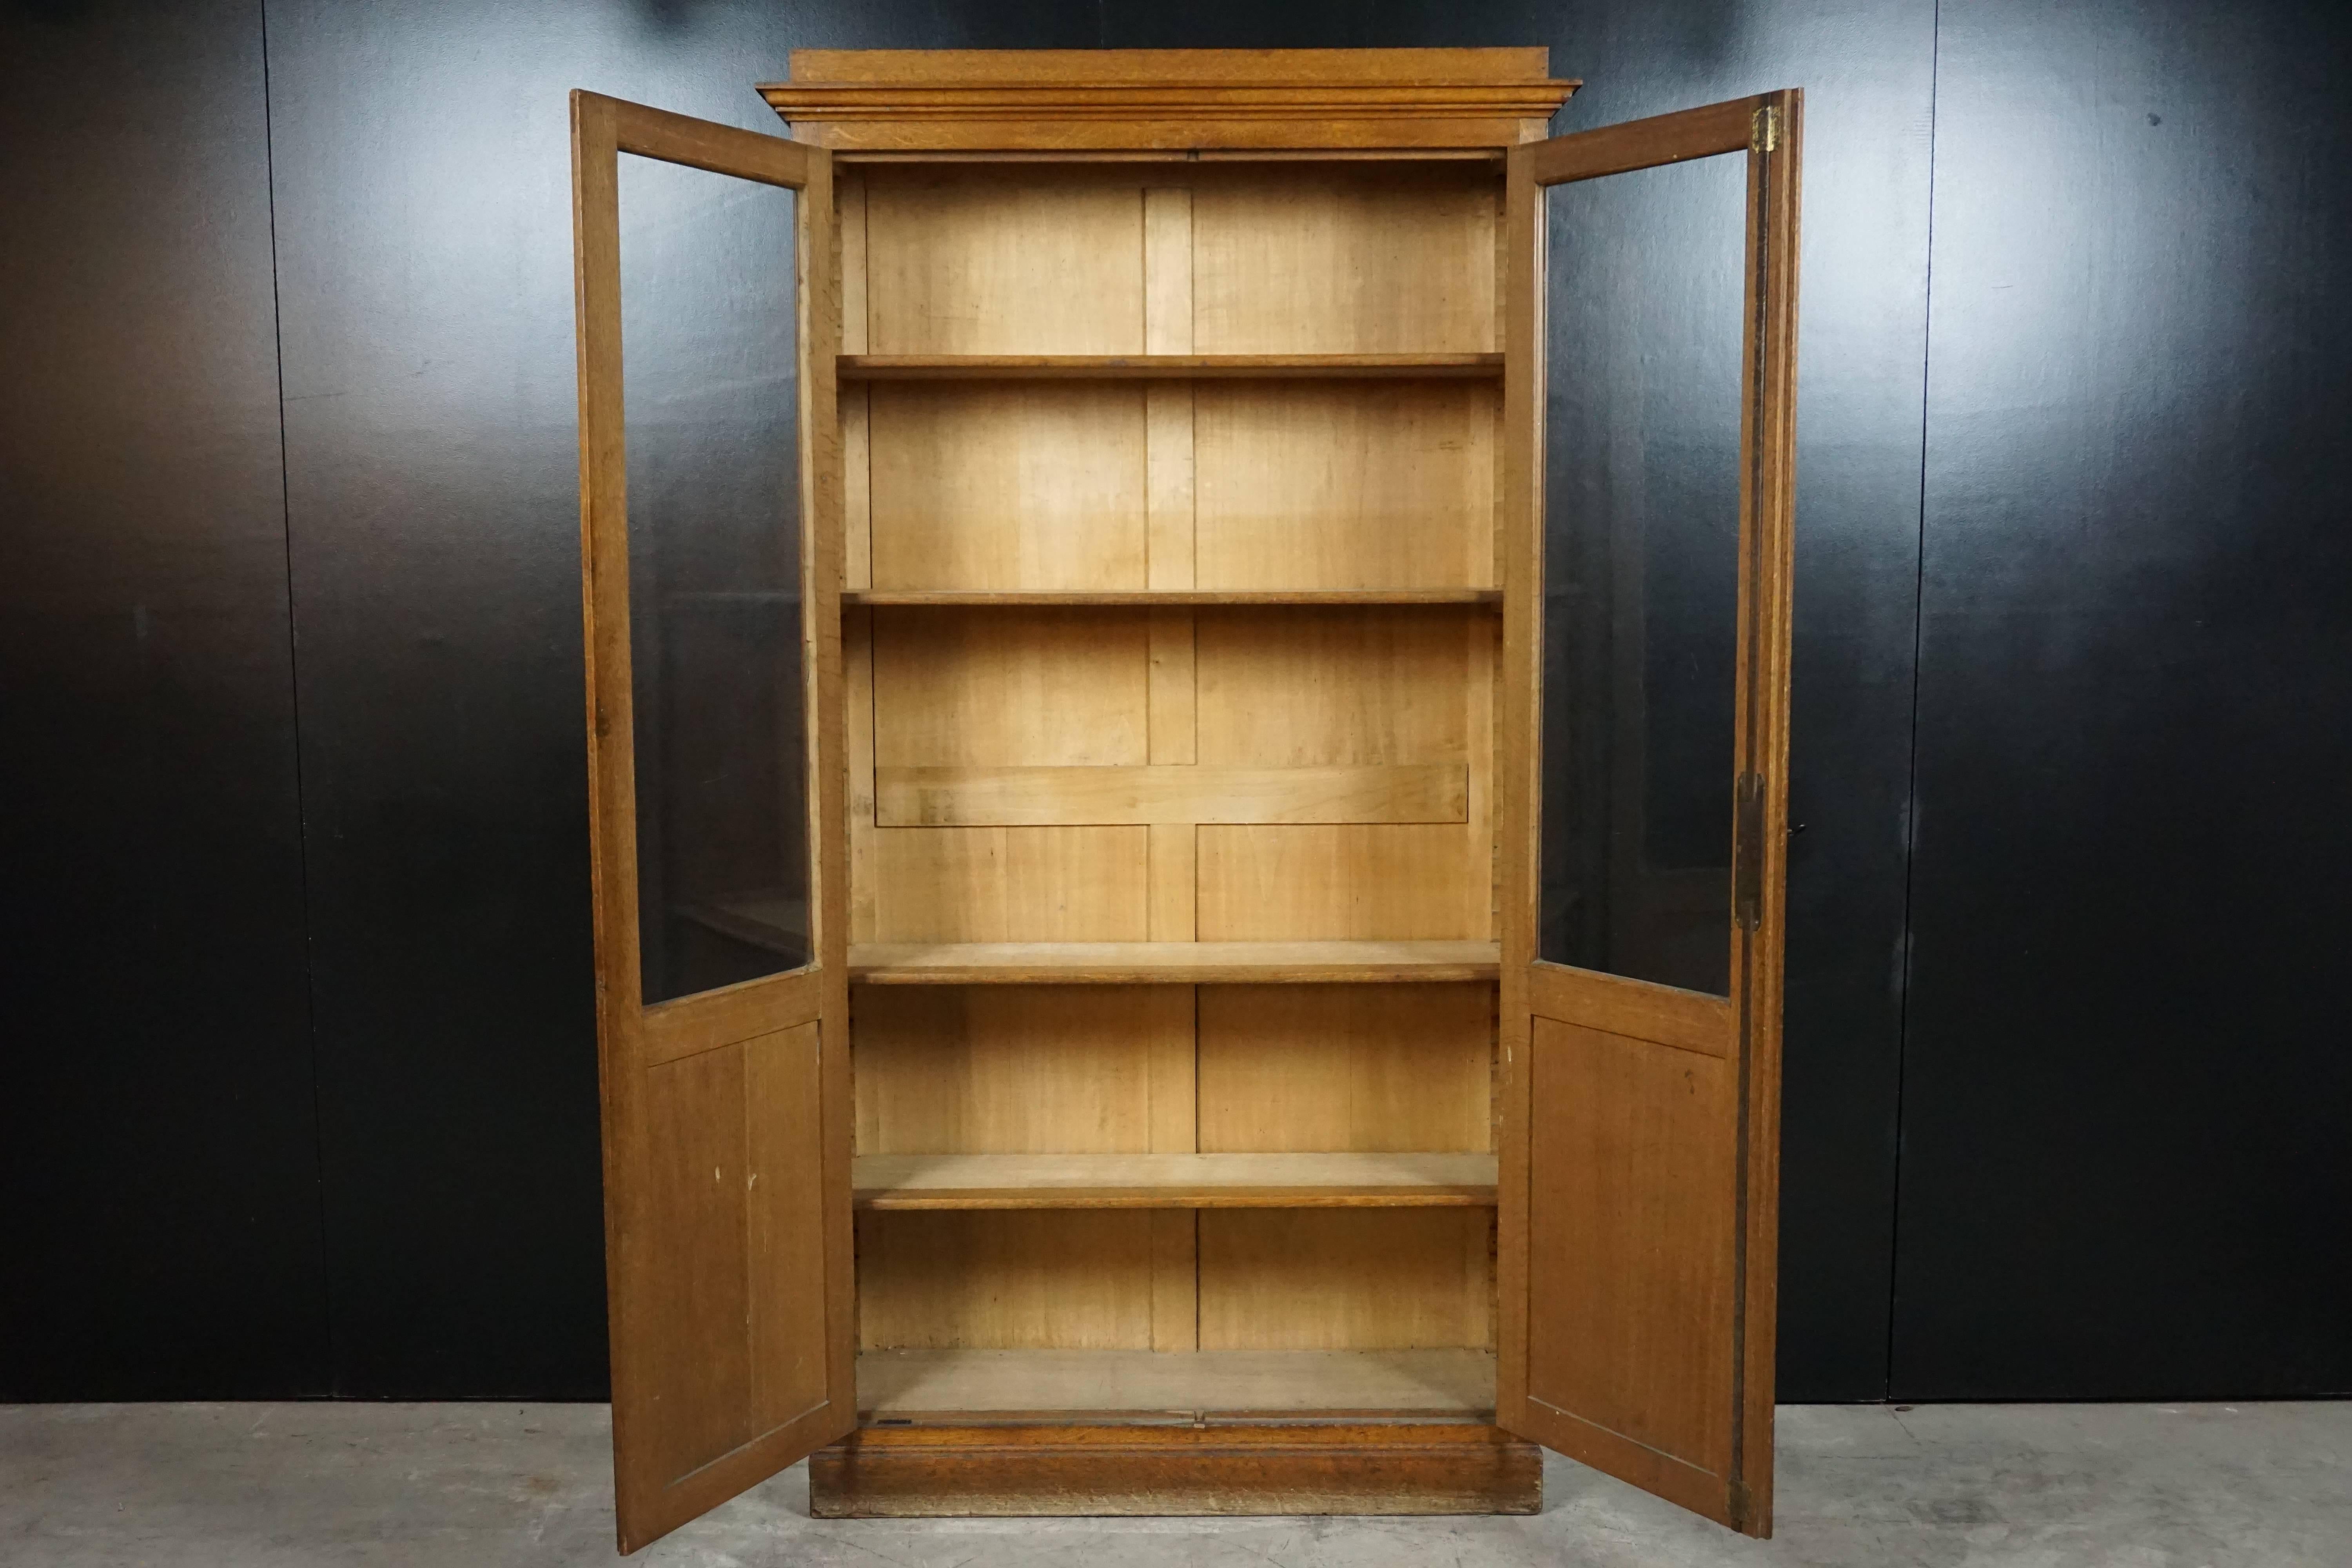 Two-door glass book case from France, circa 1930. Solid oak construction with adjustable shelving. Working lock with key Included.